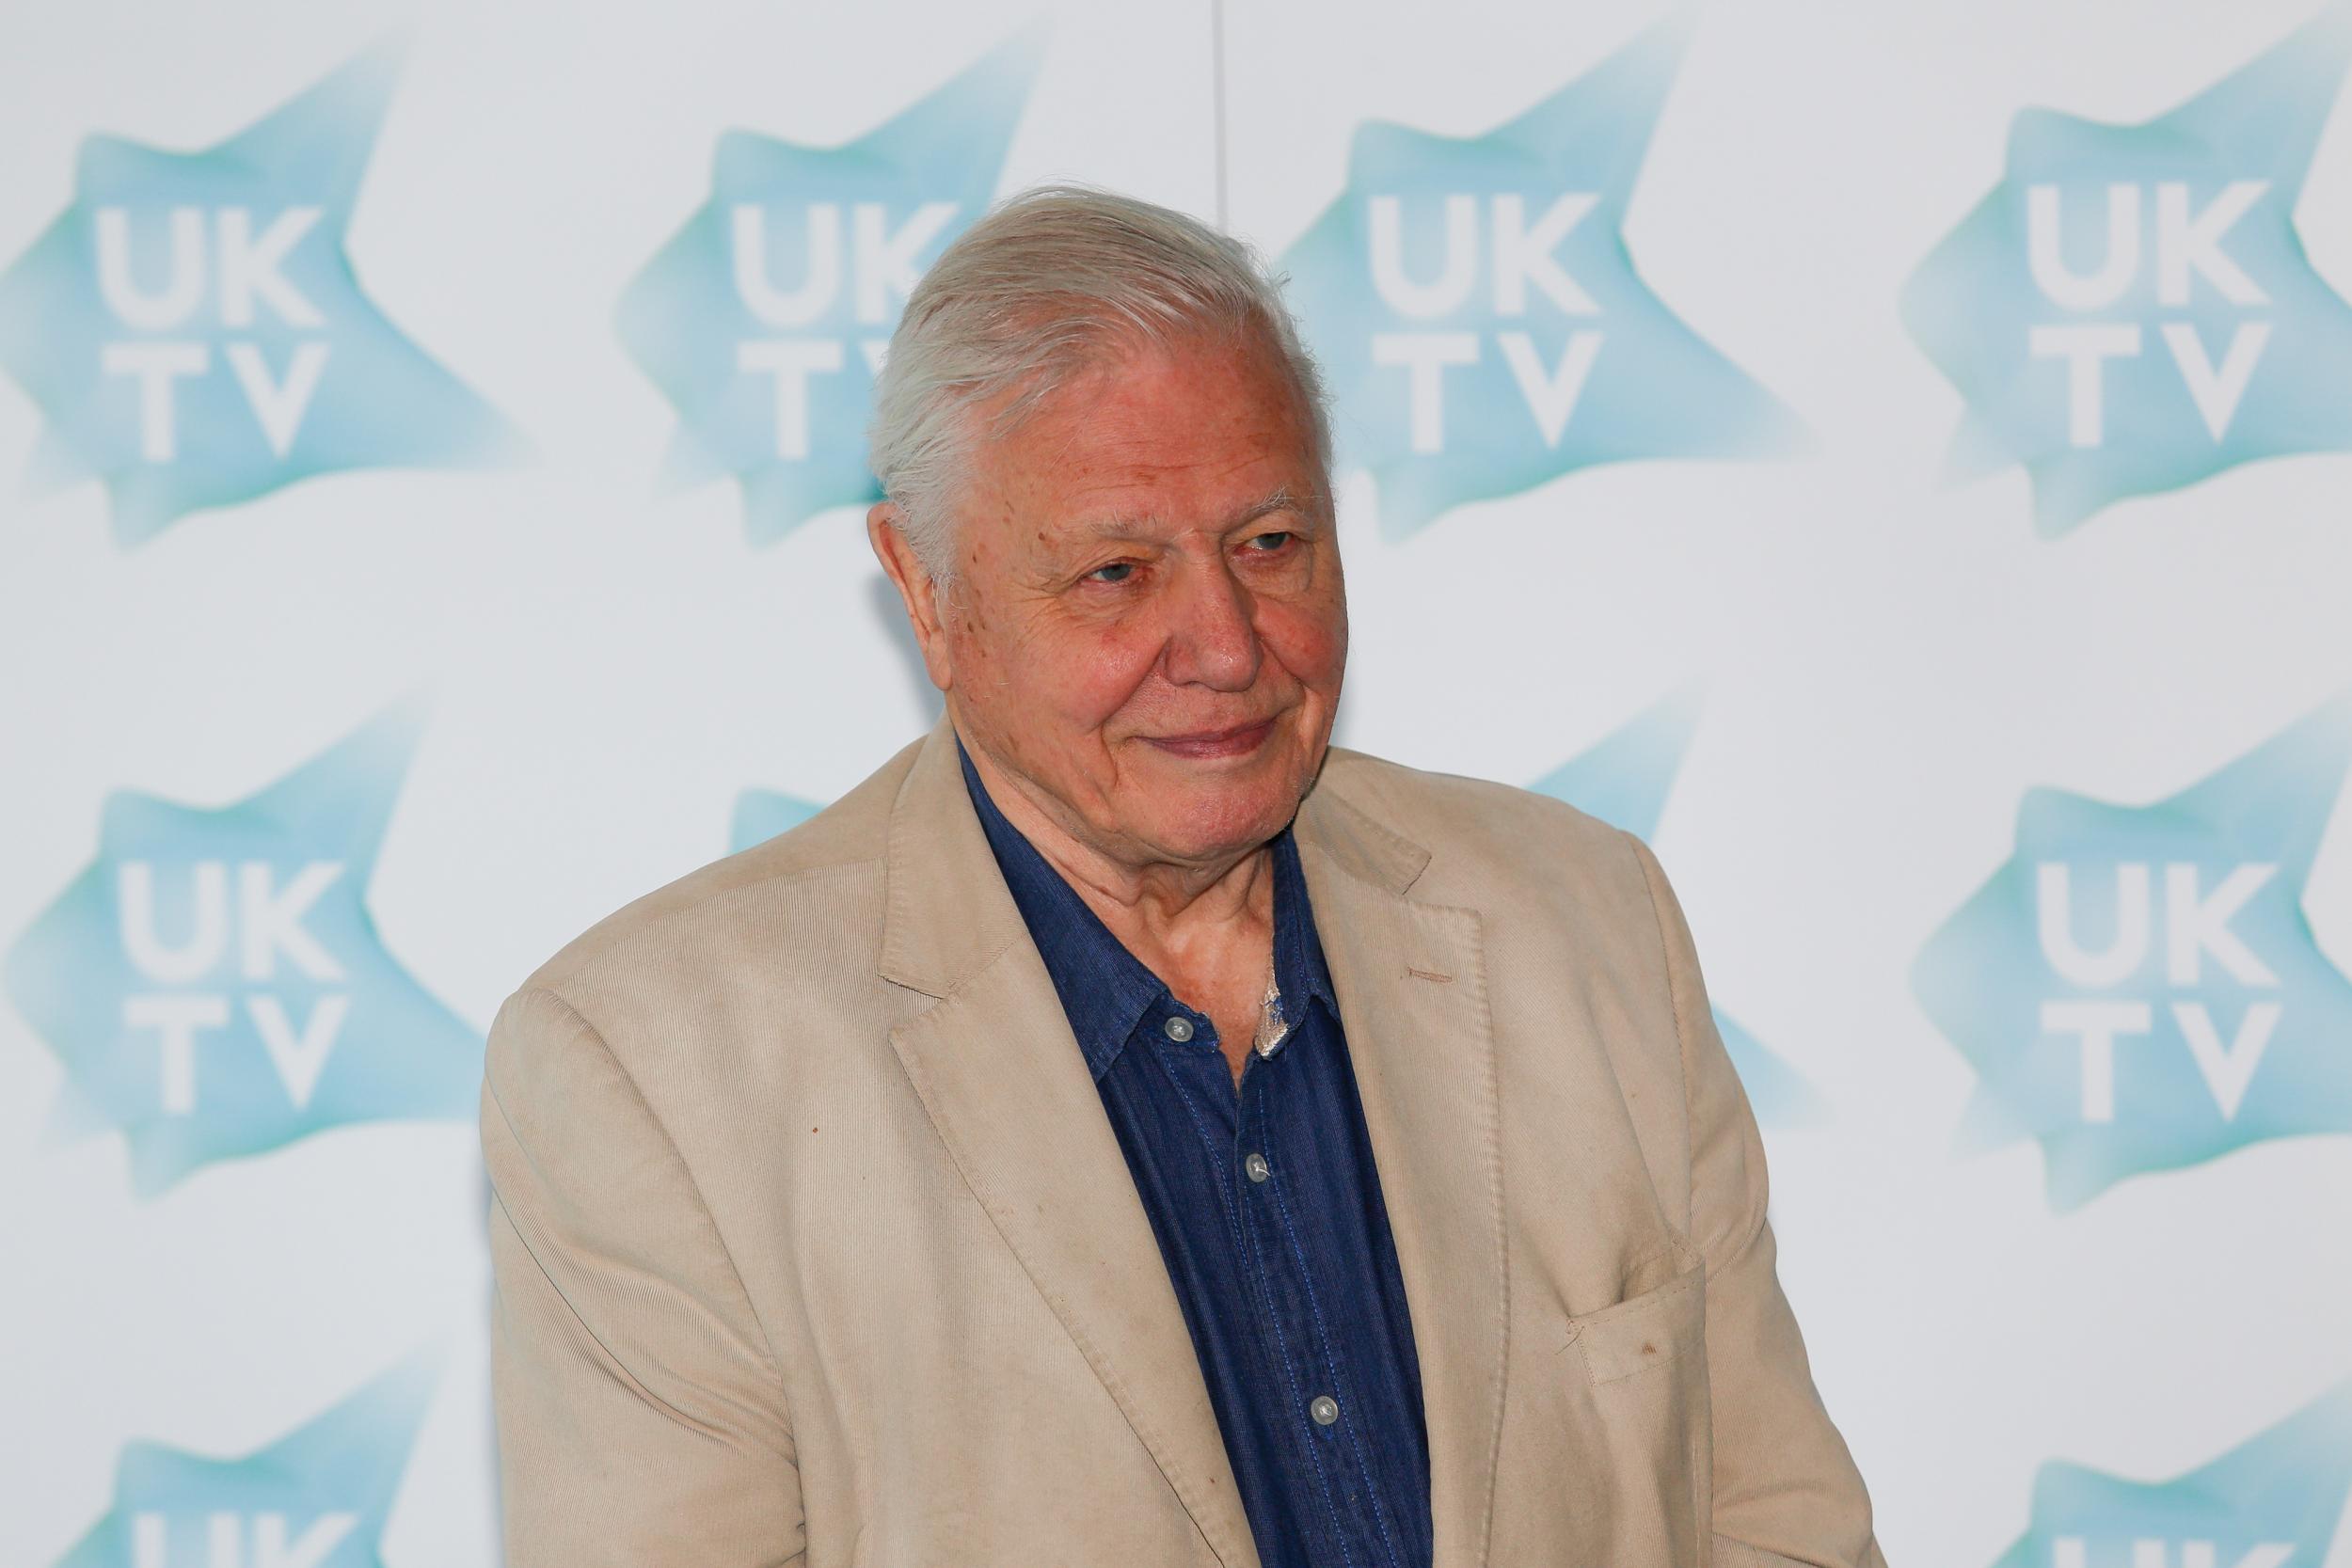 Attenborough said that now more than ever, people have the 'power' to improve the planet